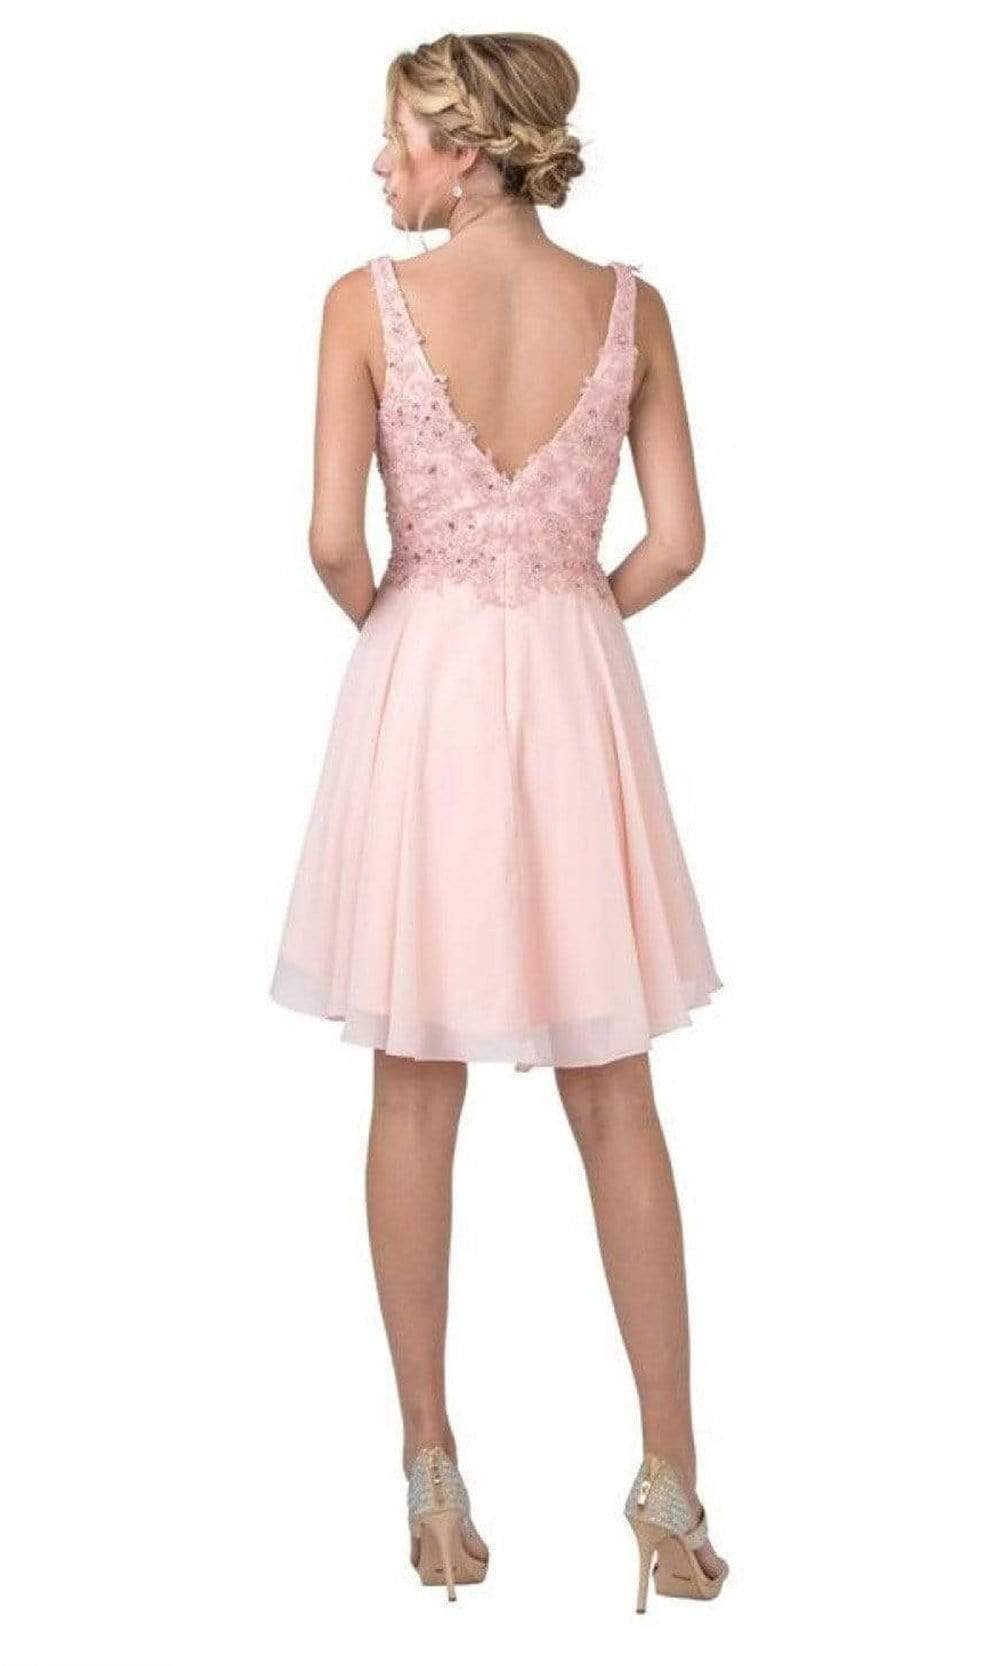 Aspeed Design - S2331 Sleeveless Plunging V-Neck Cocktail Dress Special Occasion Dress